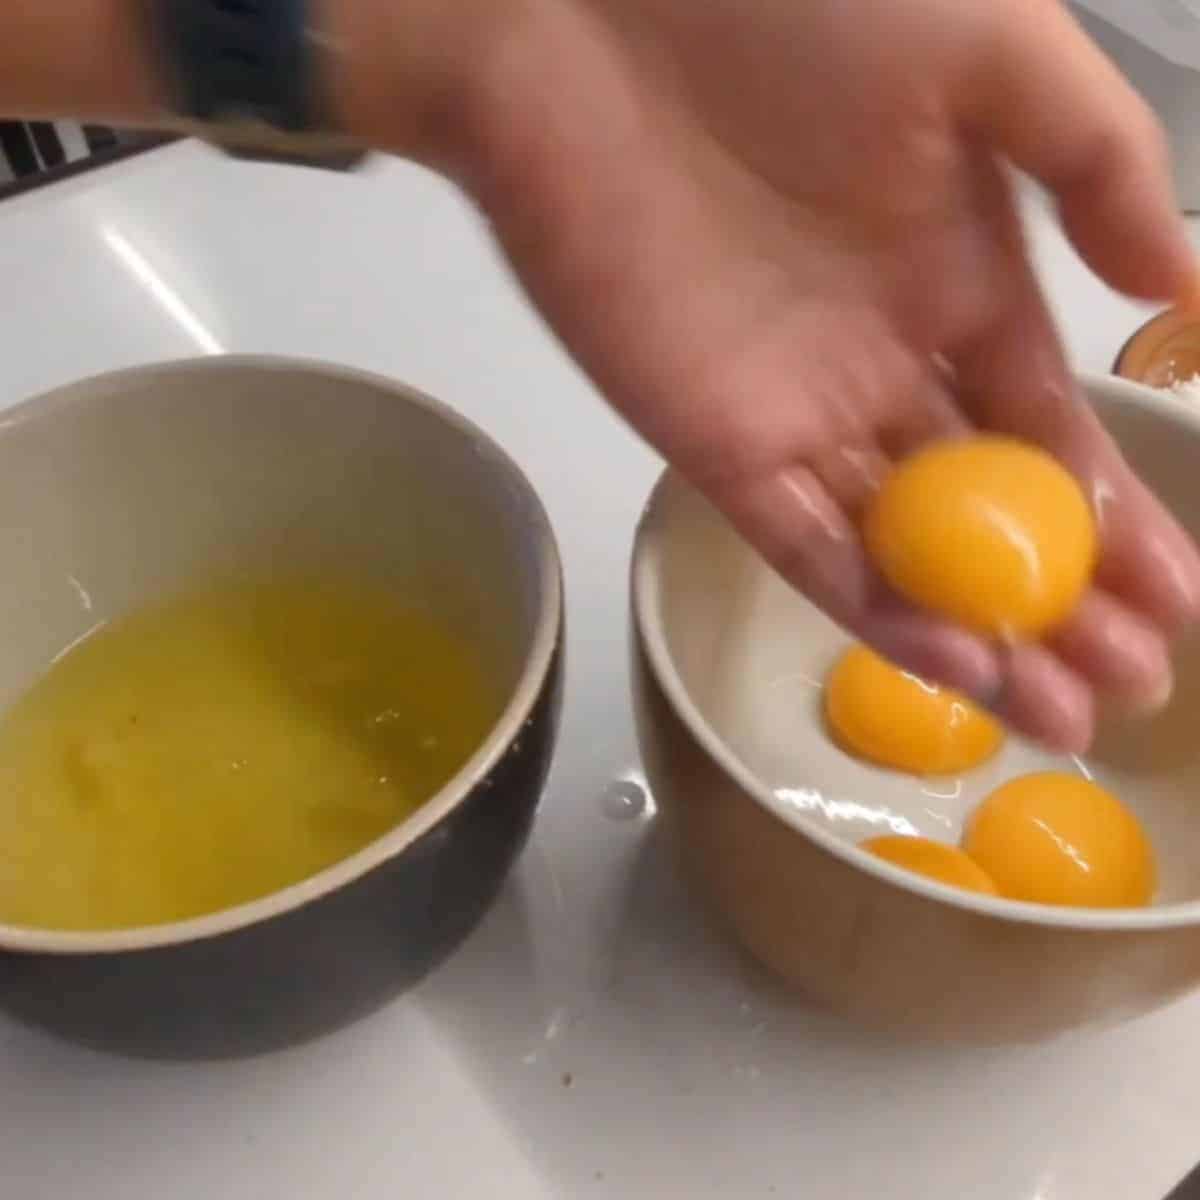 Separate egg yolks from the whites